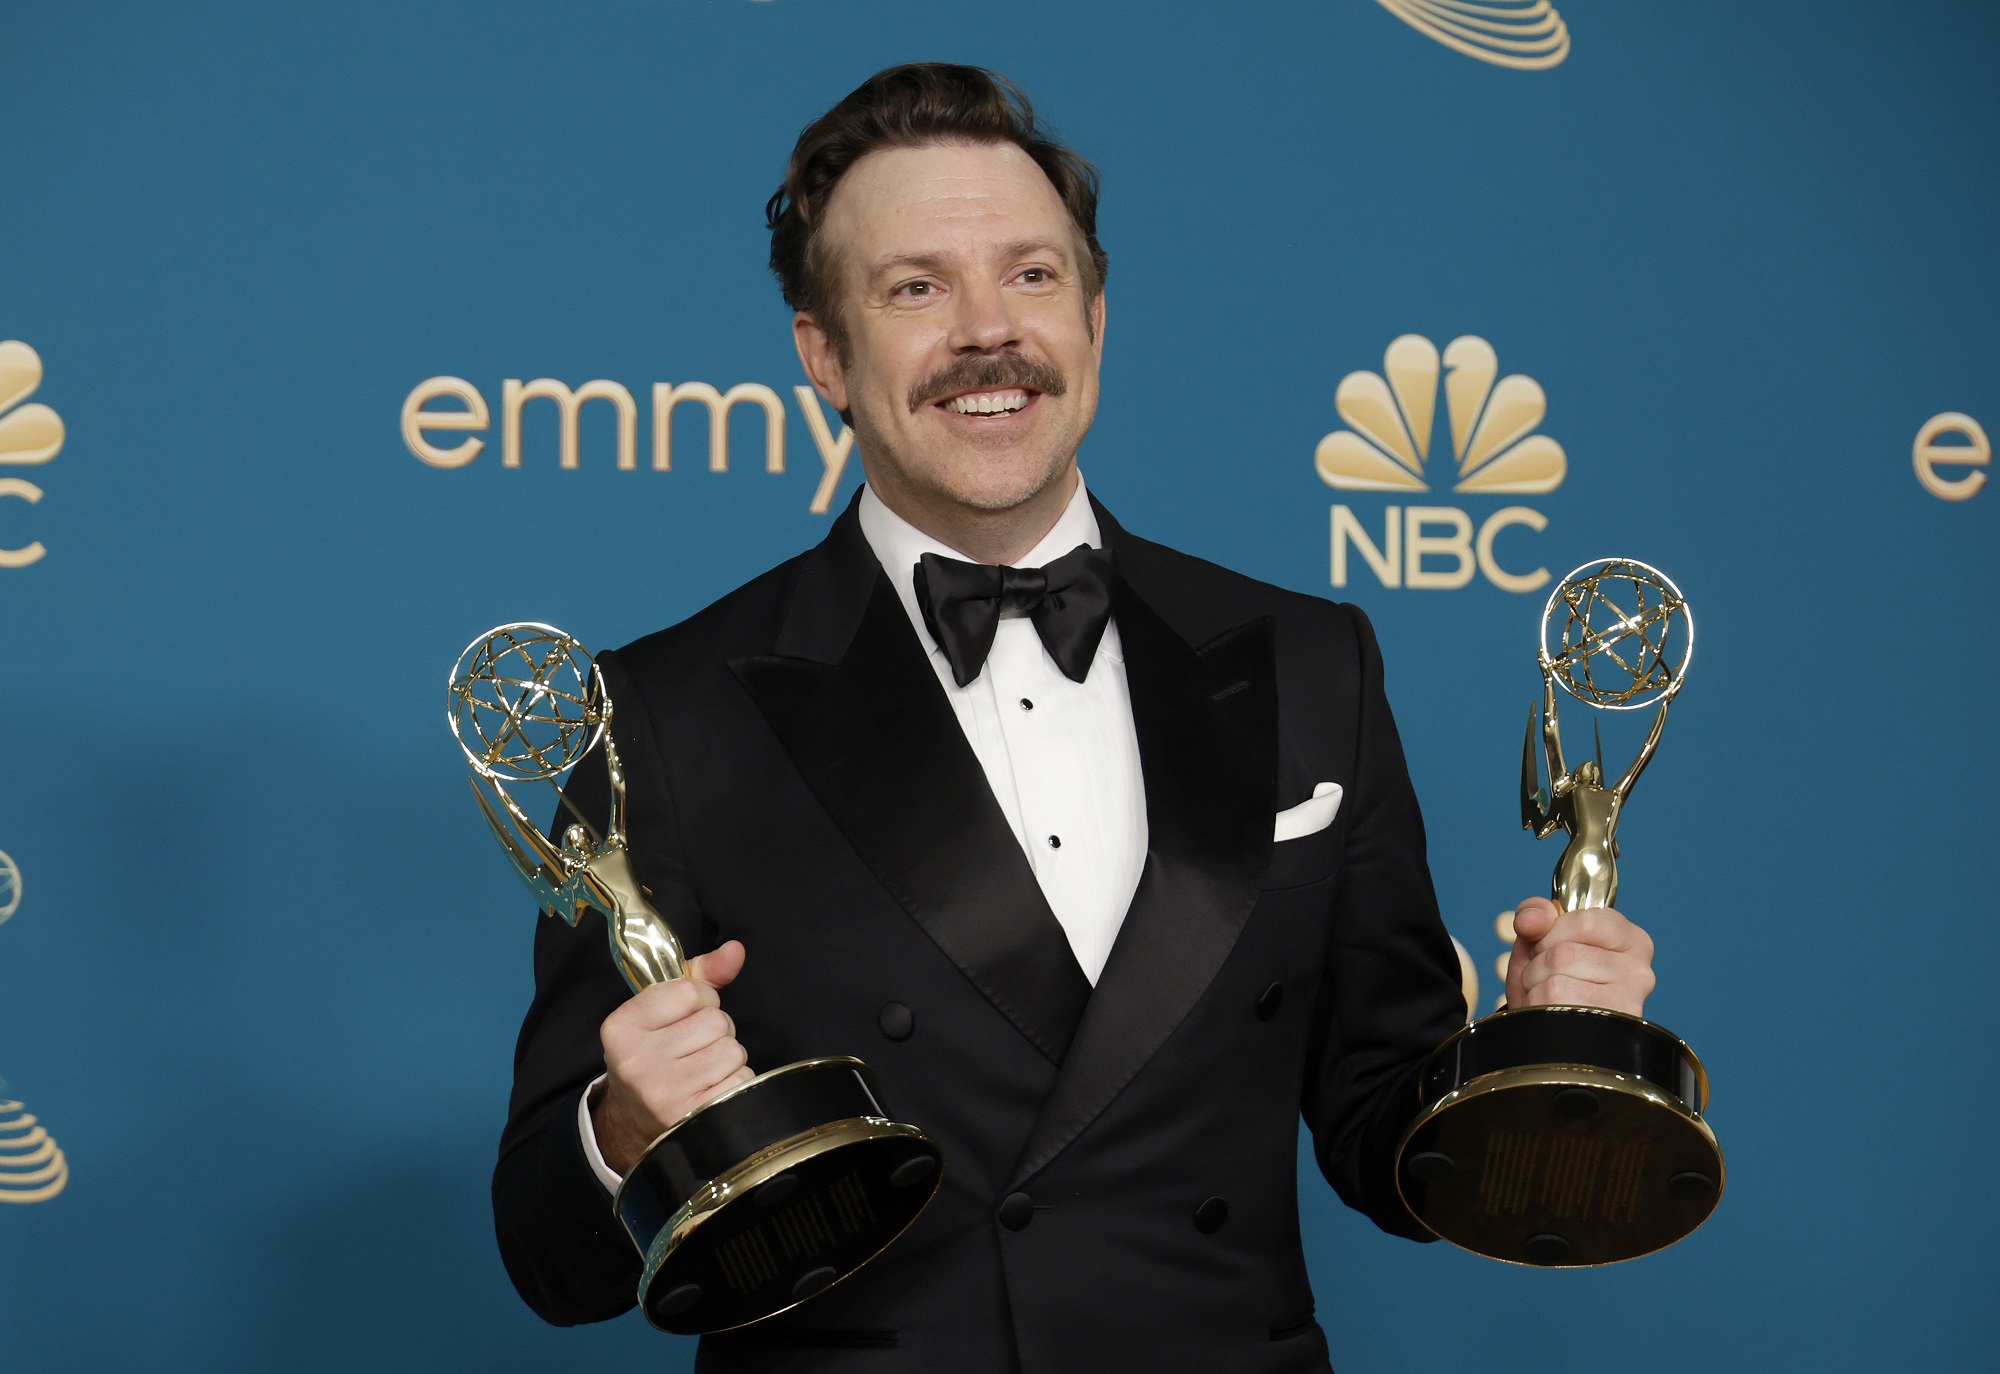 ‘Ted Lasso’ Takes Home Significantly Fewer Emmys Than Last Year Despite a Repeat 20 Nominations 